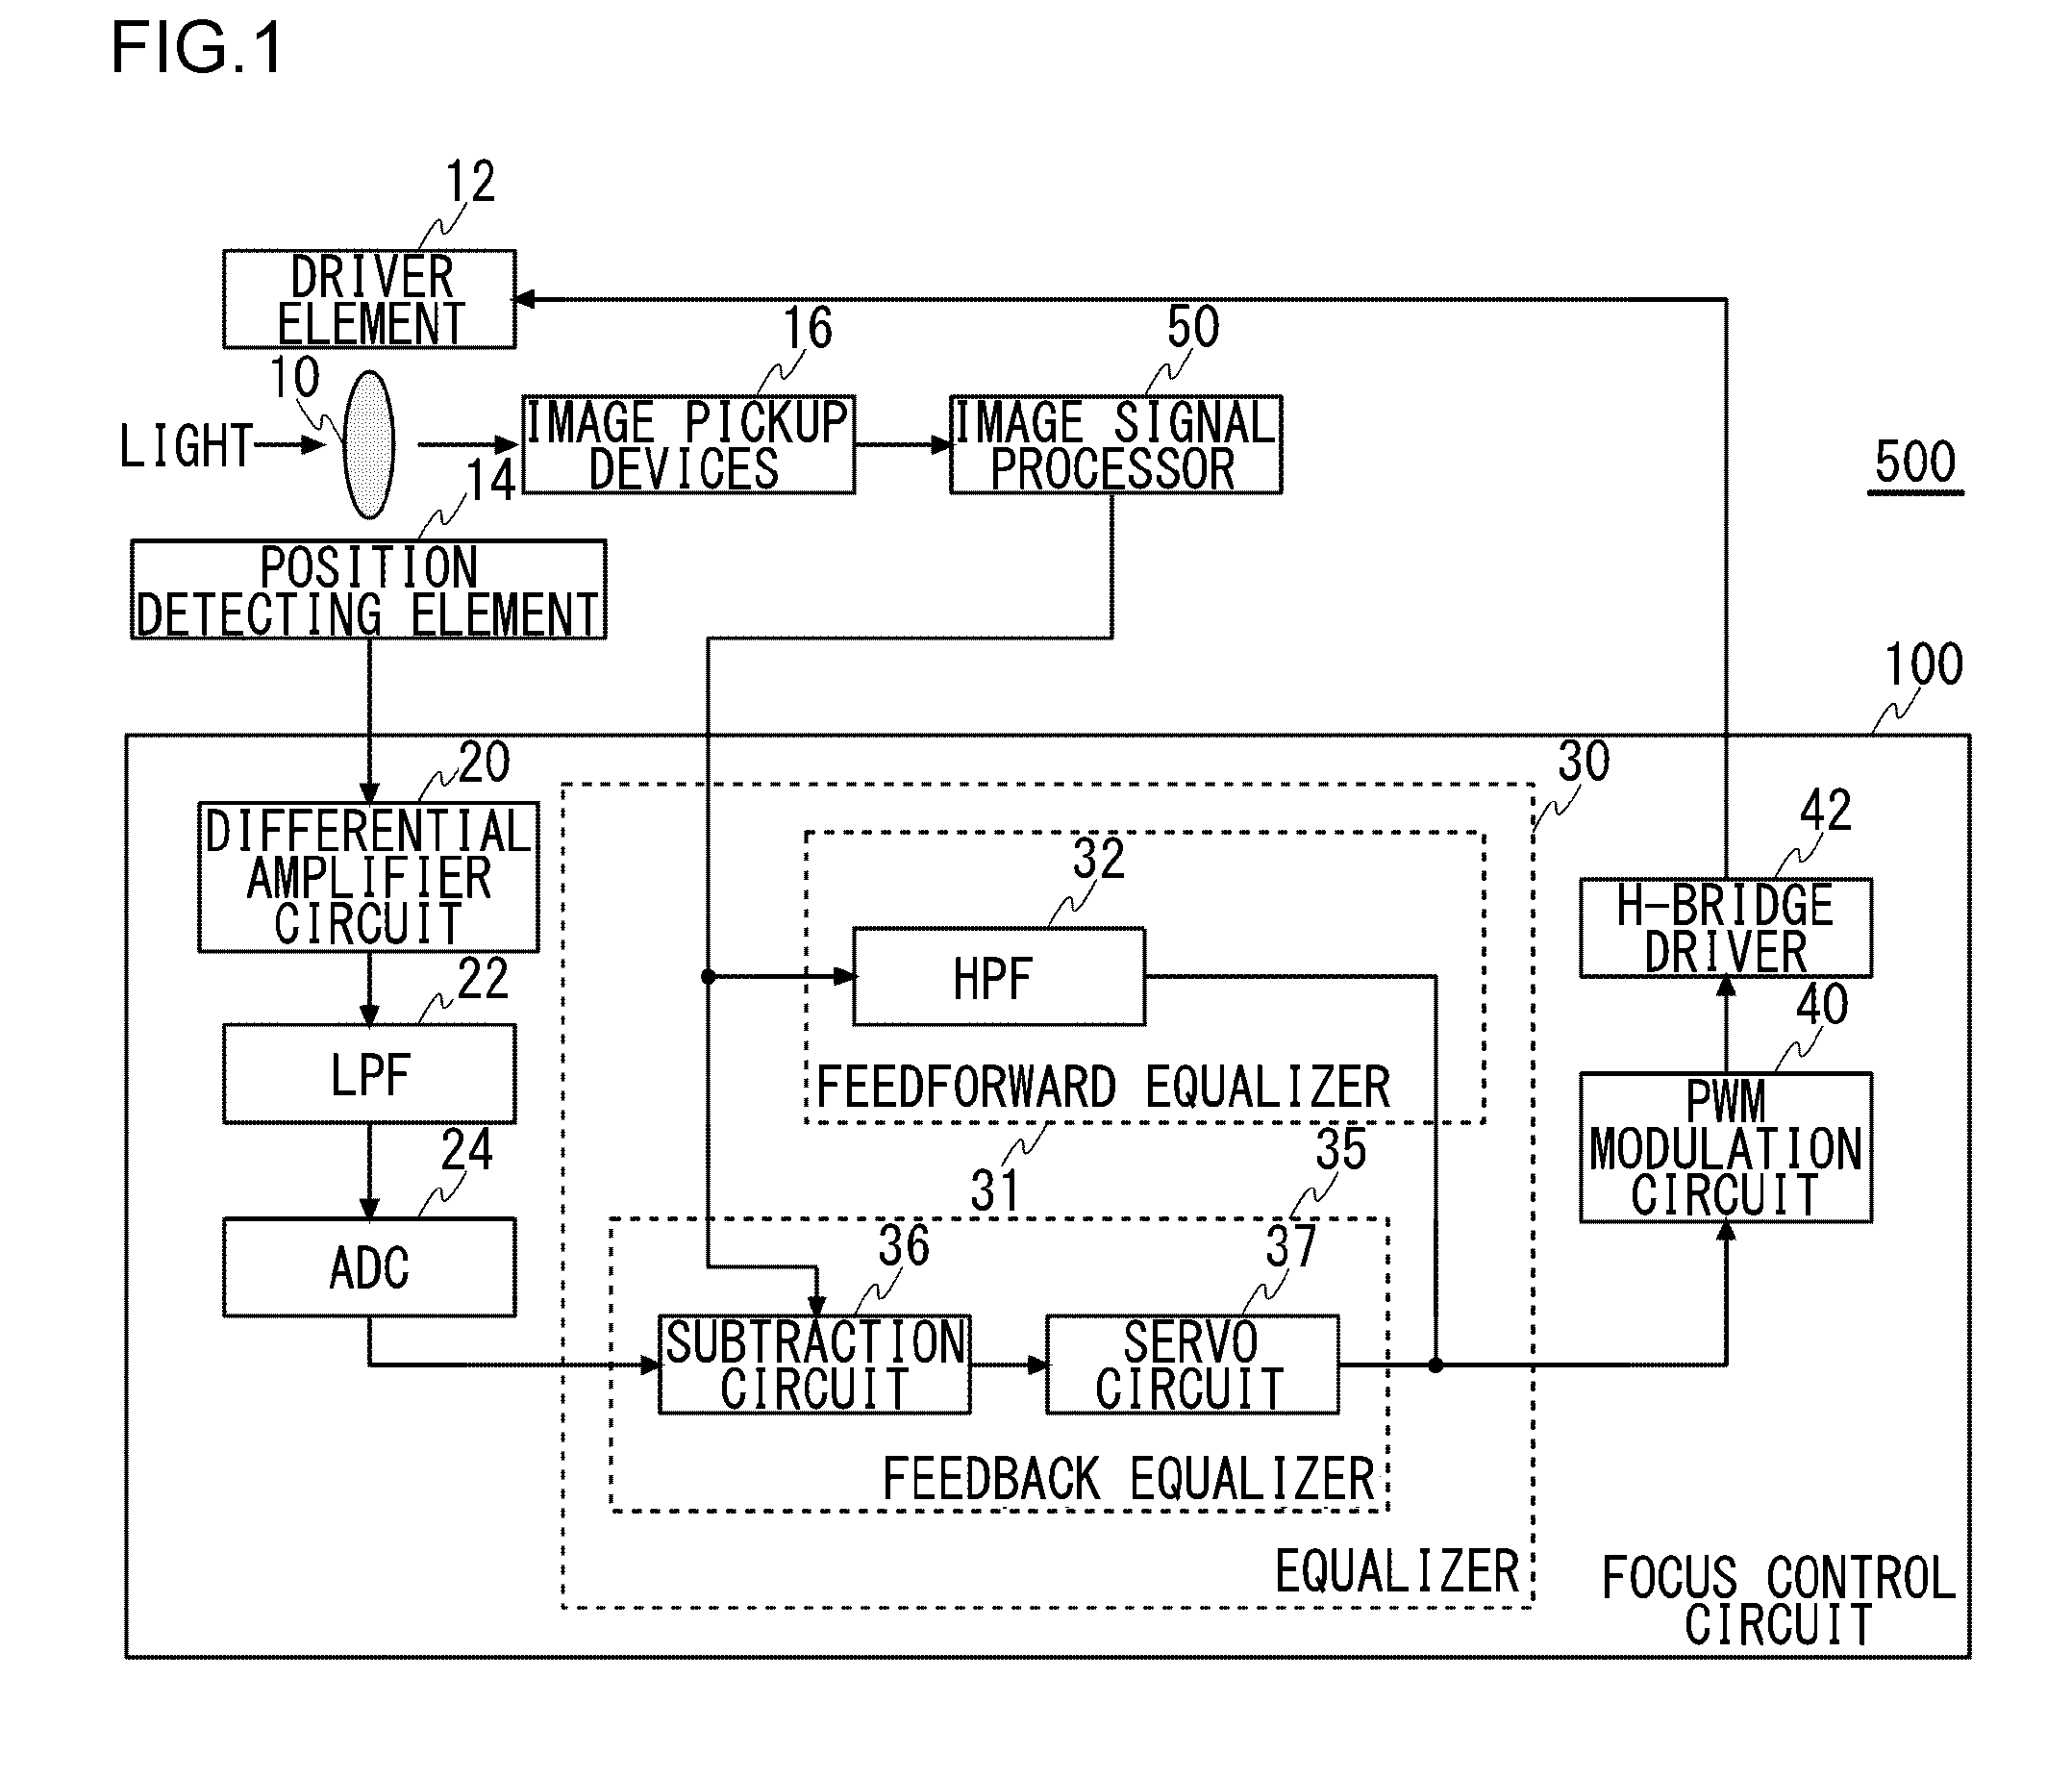 Focus control circuit for adjusting the focus by moving a lens